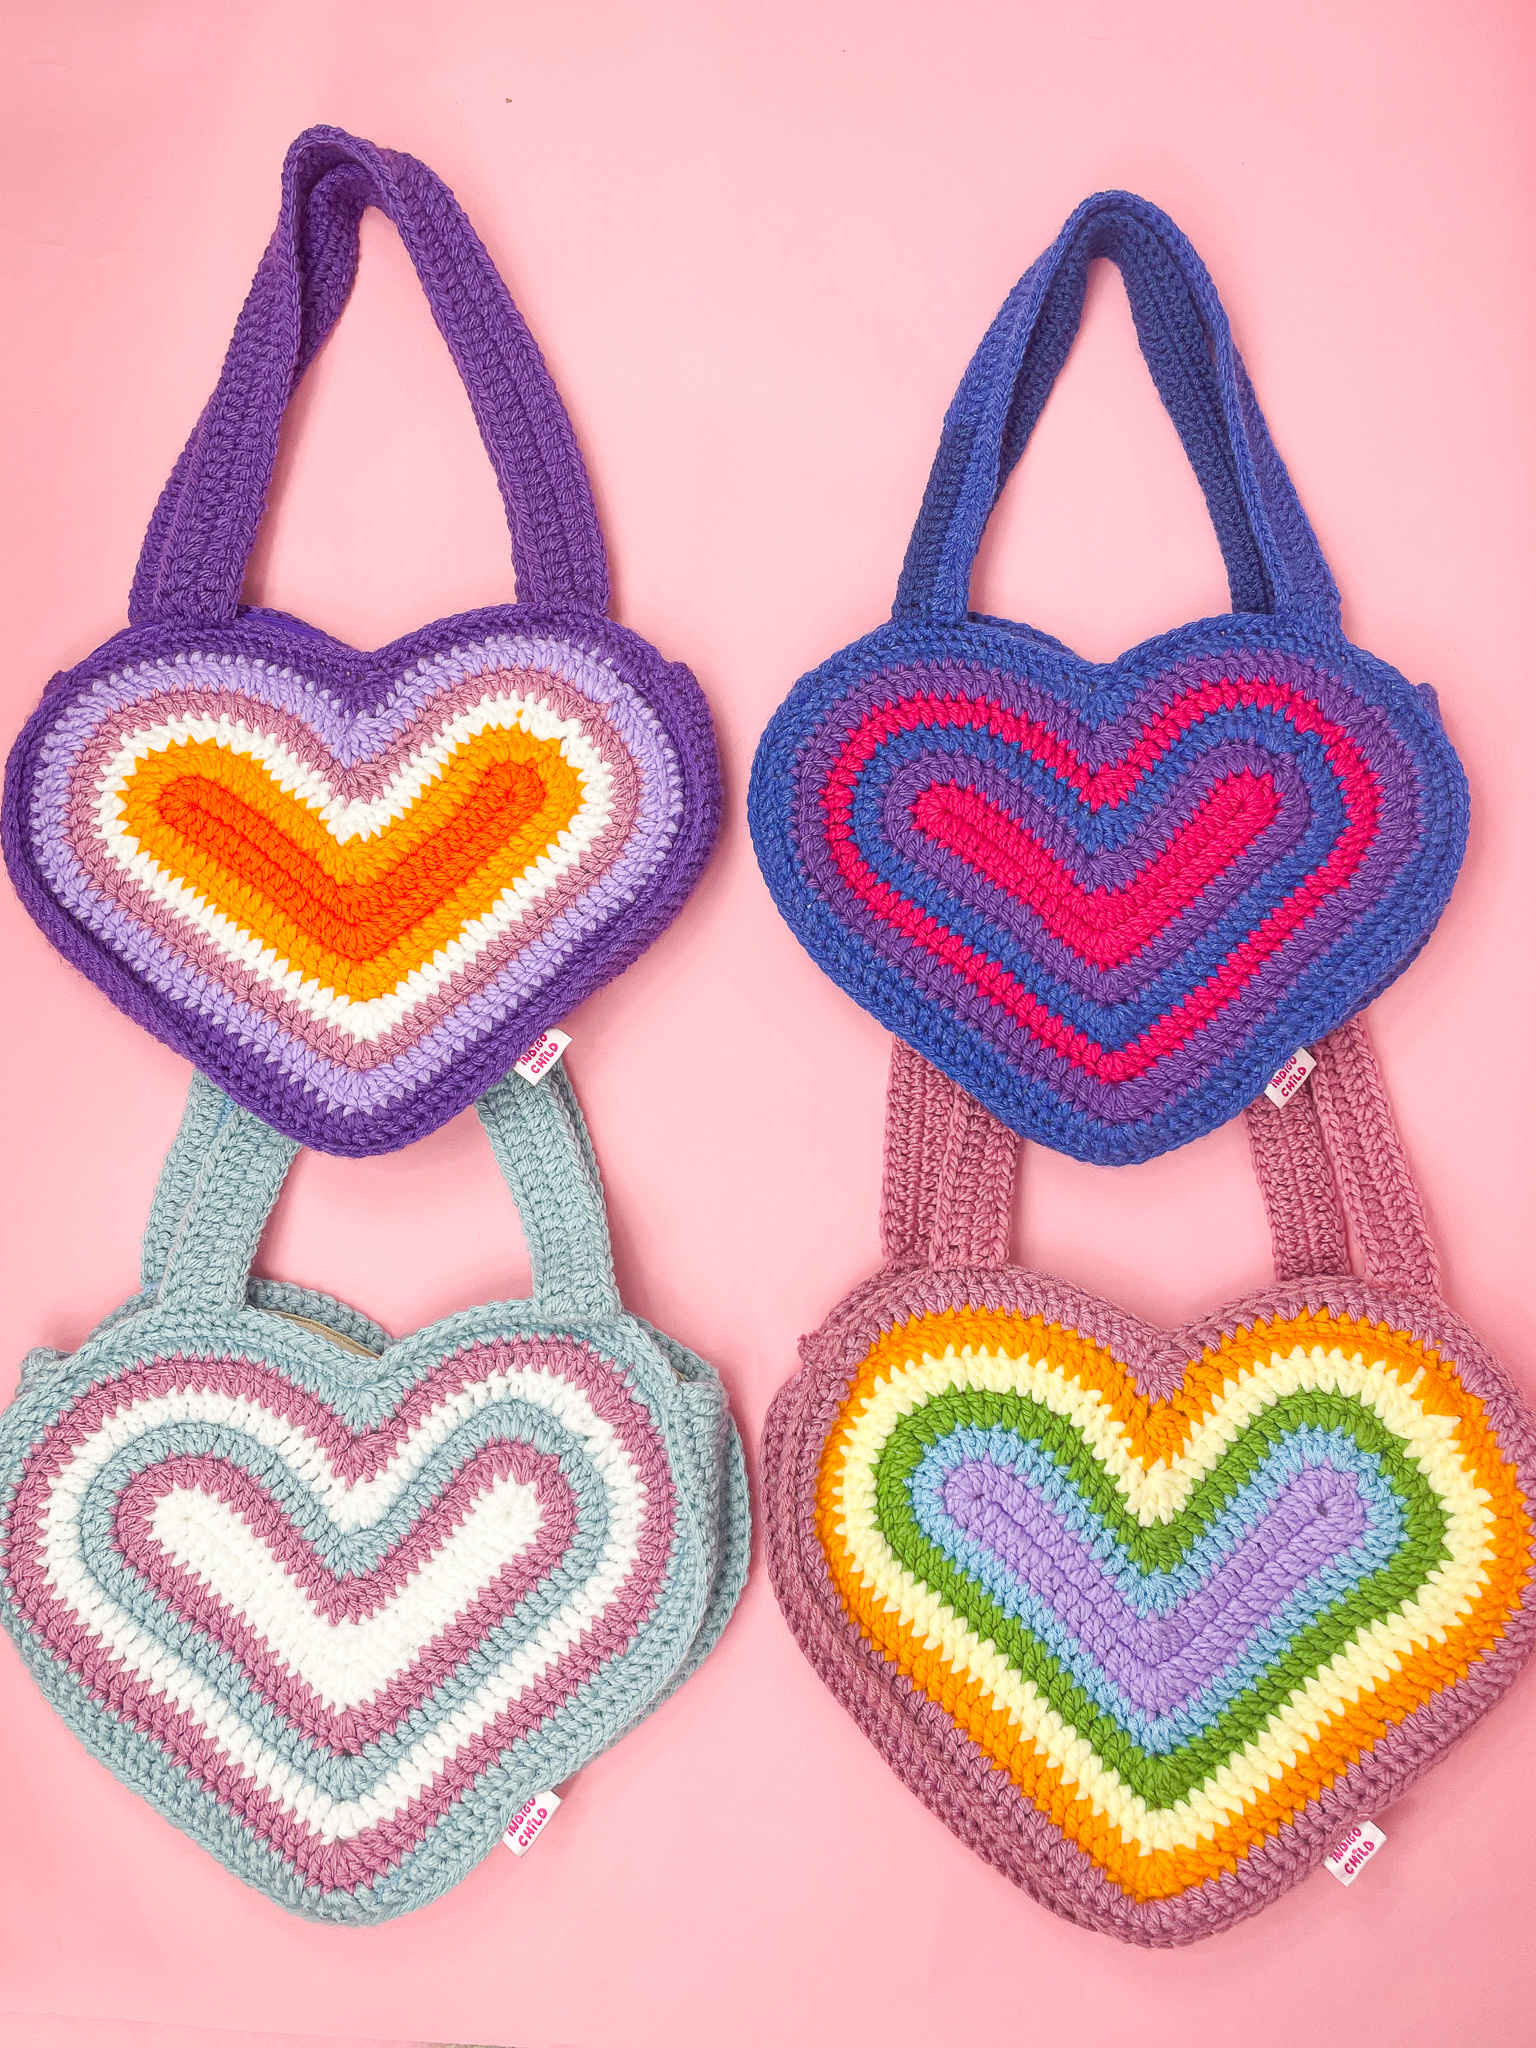 a group of colorful knitted bags